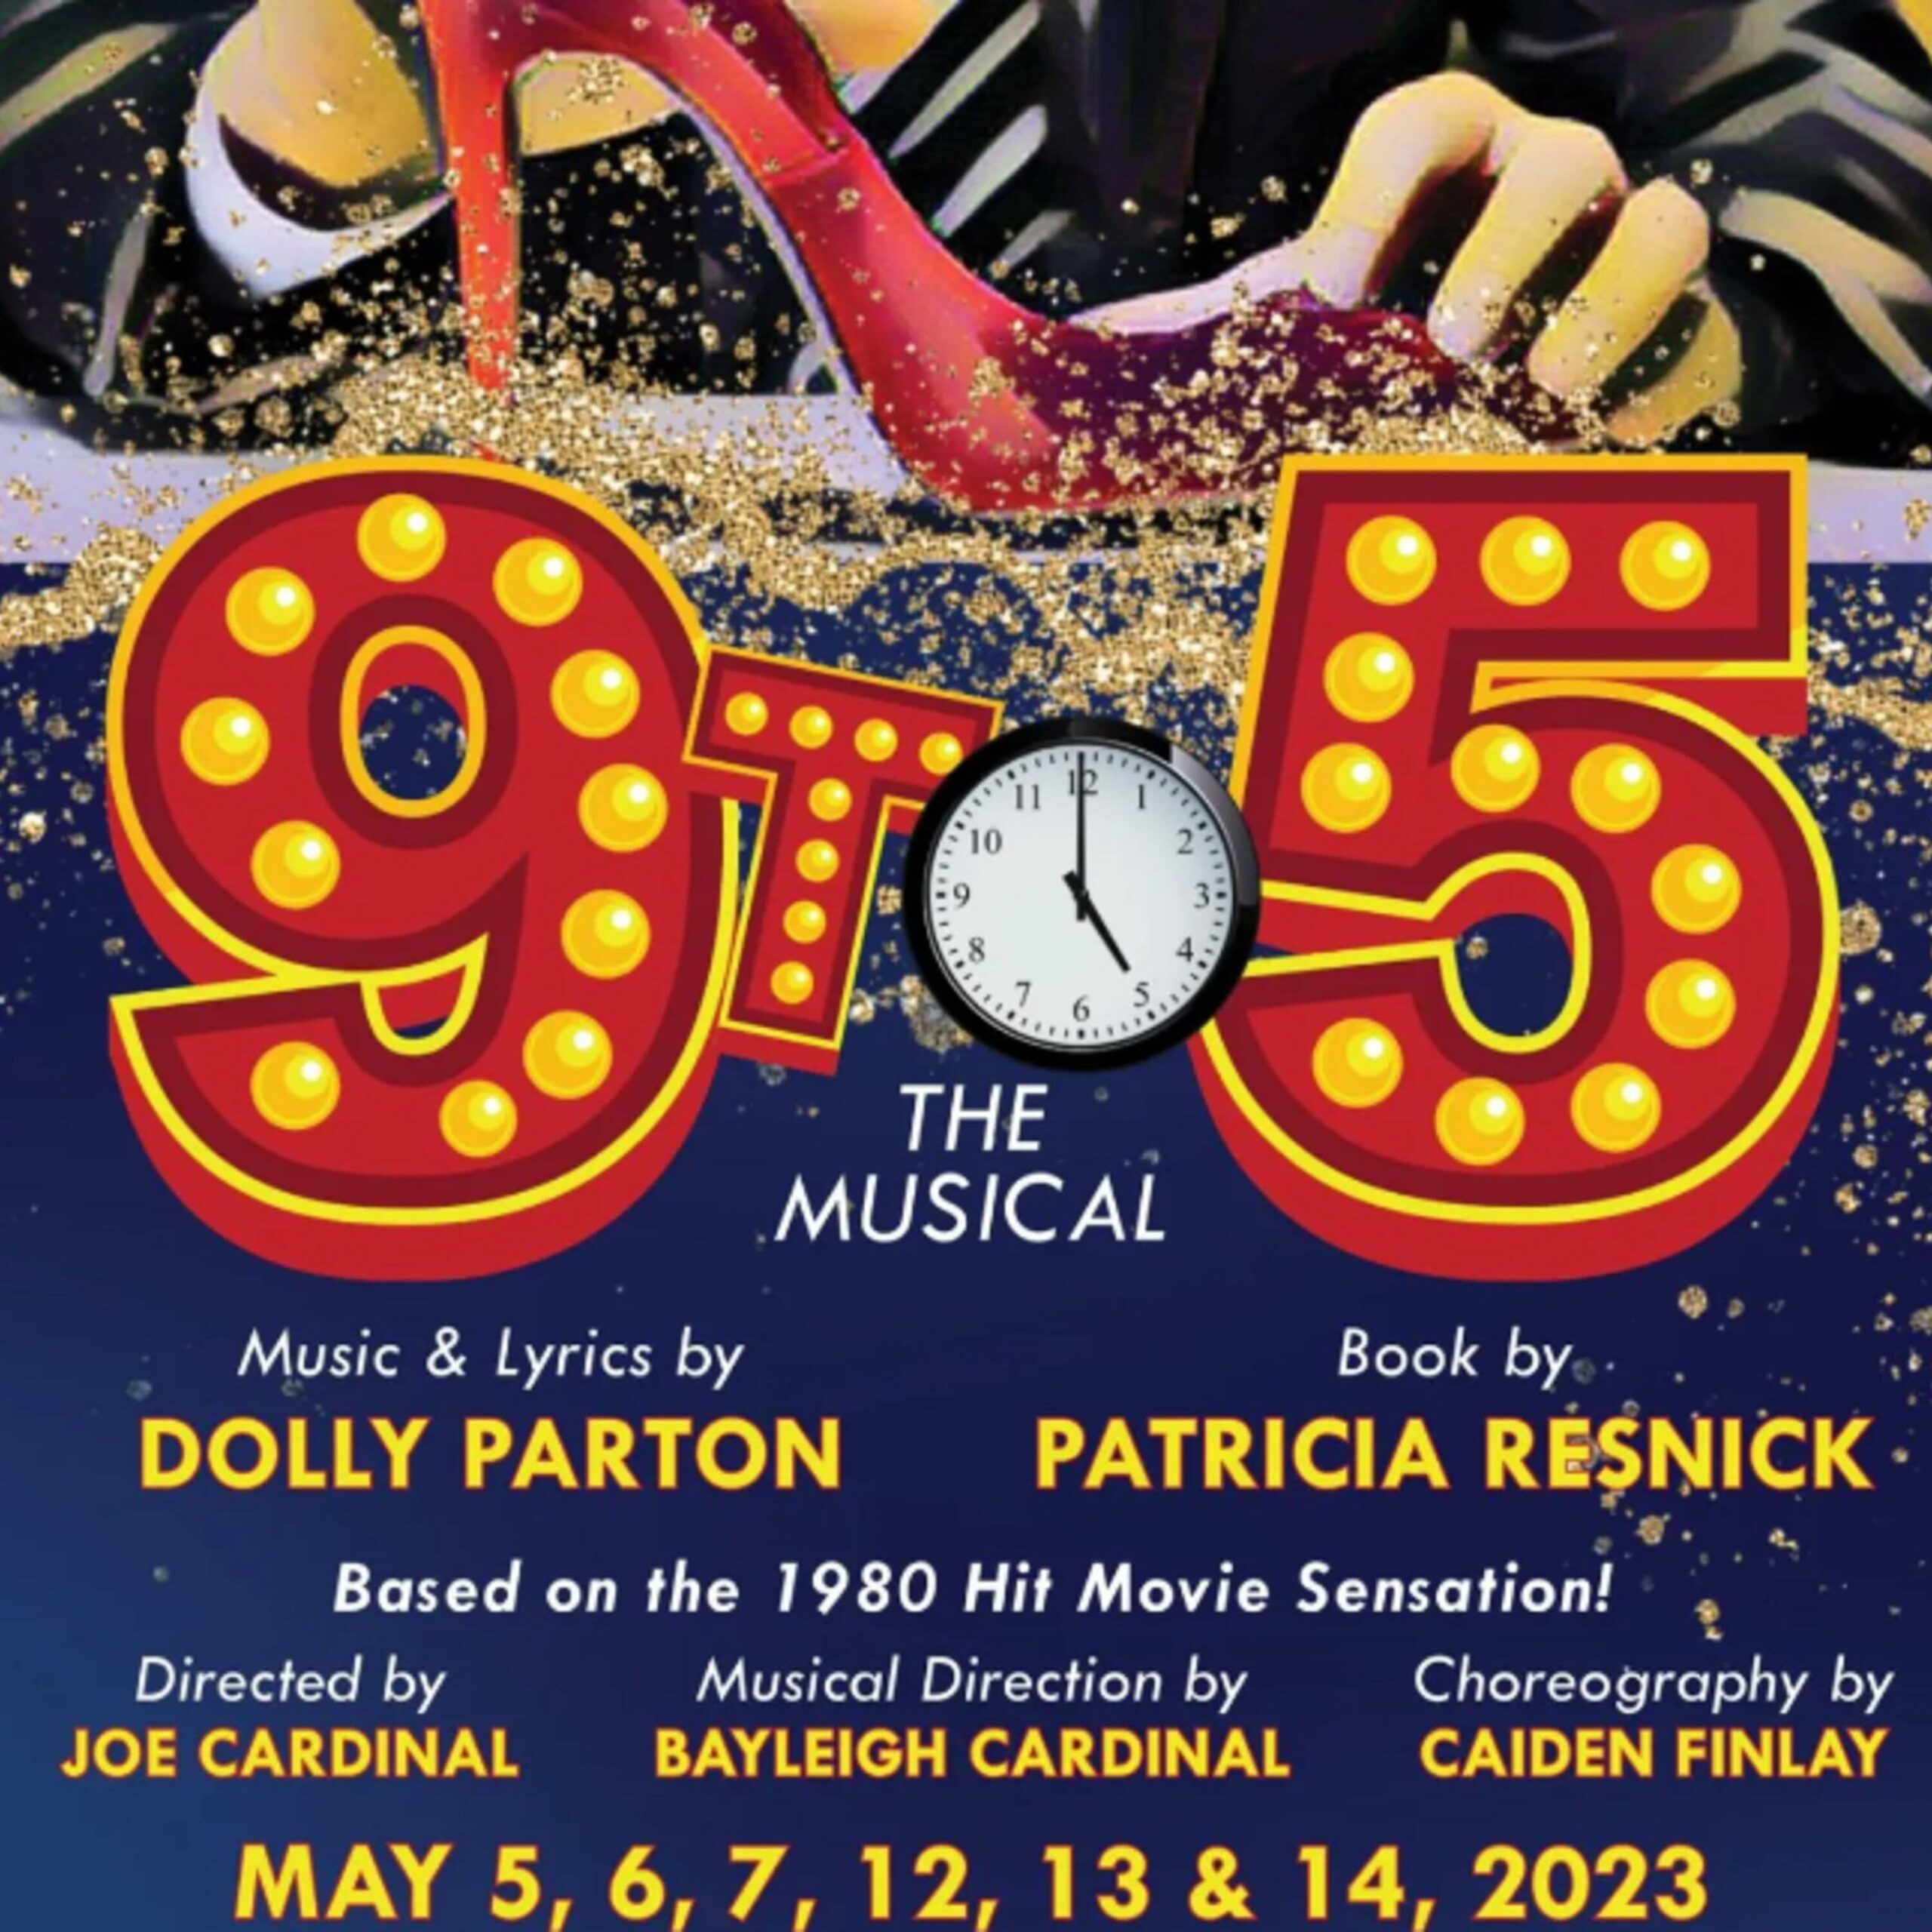 AM800 CKLW: 9 TO 5 the Musical